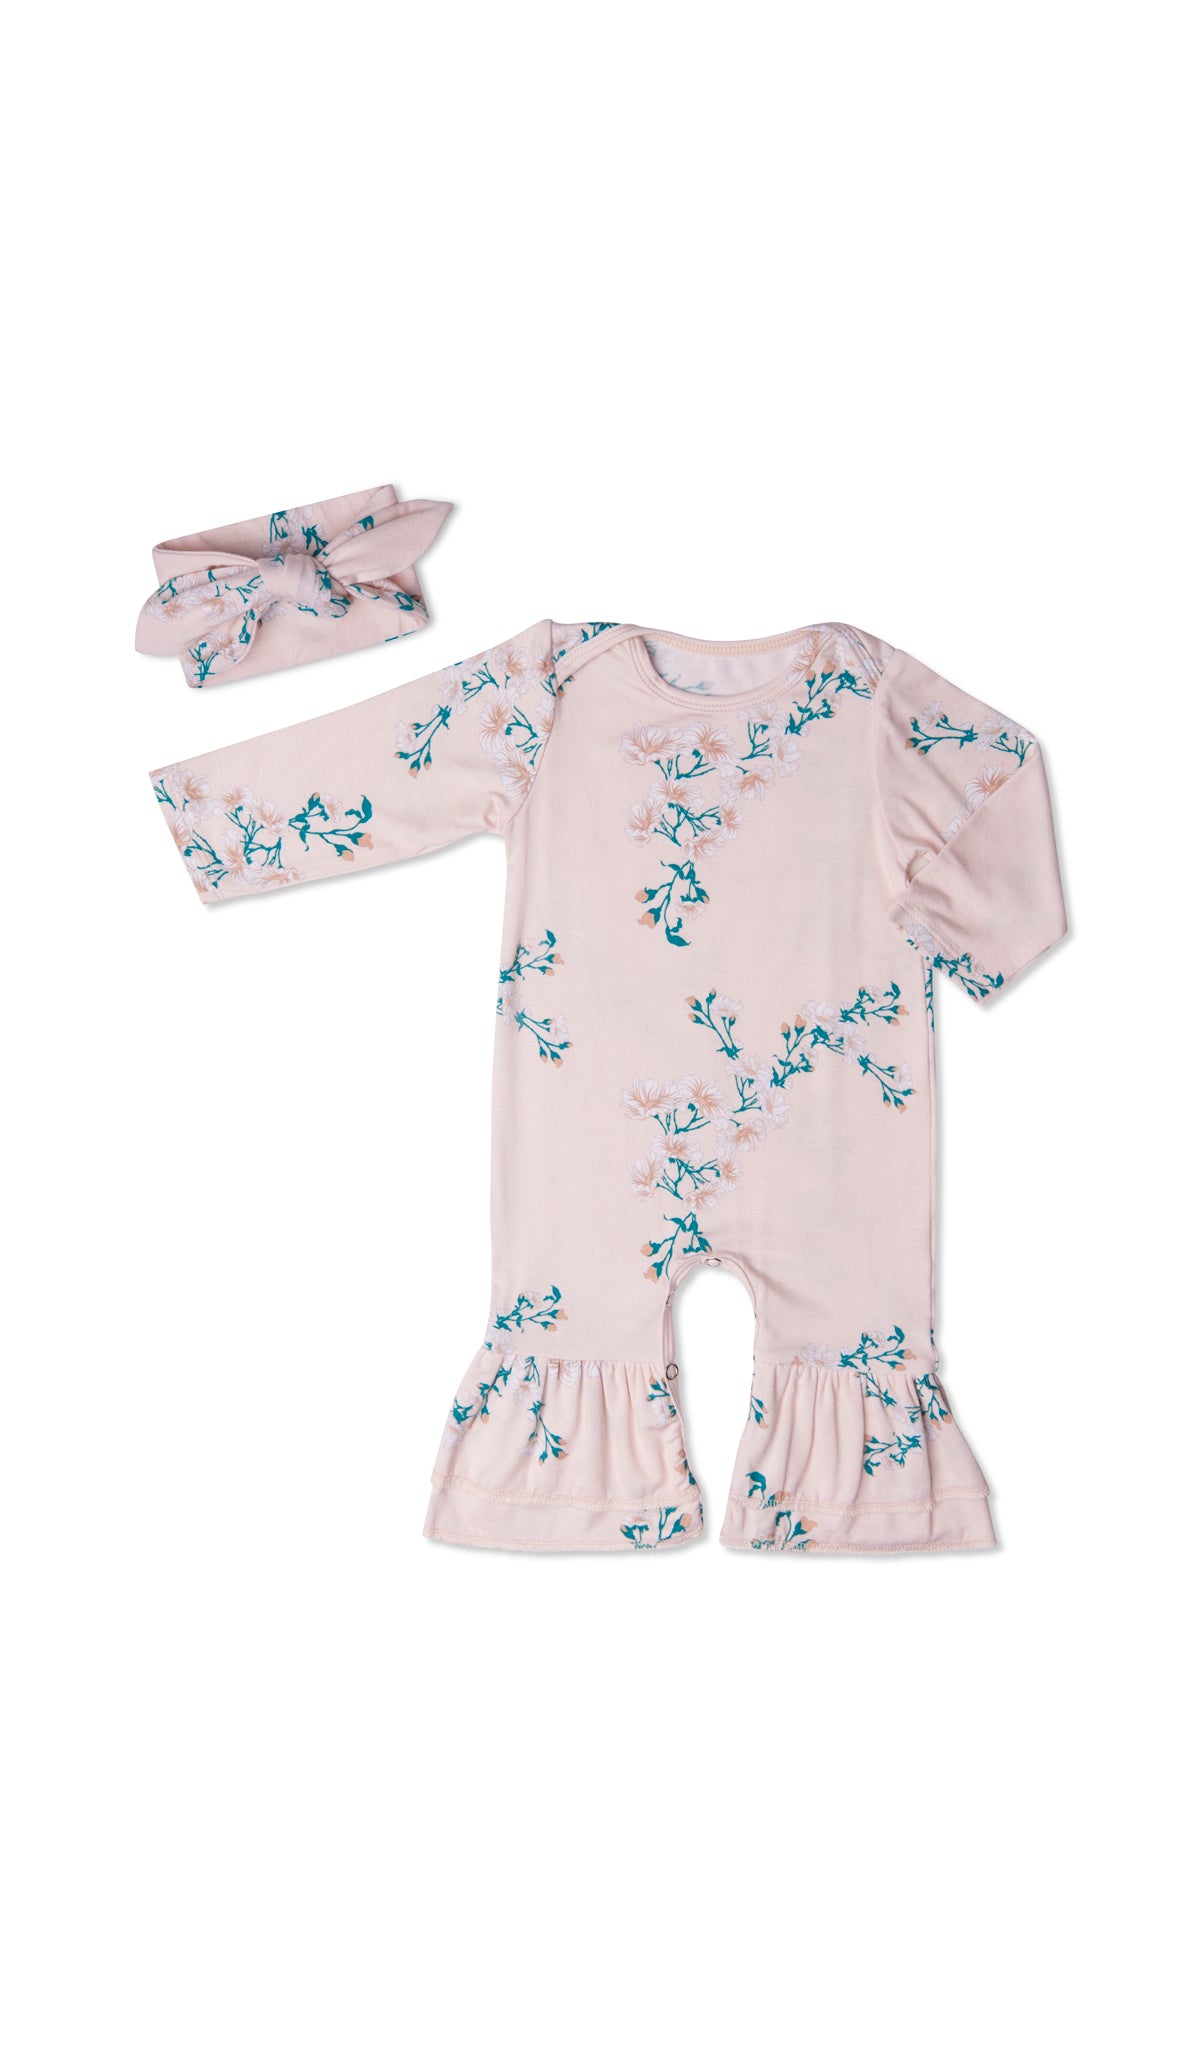 Lily Ruffle Romper 2-Piece. Flat shot of long sleeve romper with ruffles on legs and matching headwrap.